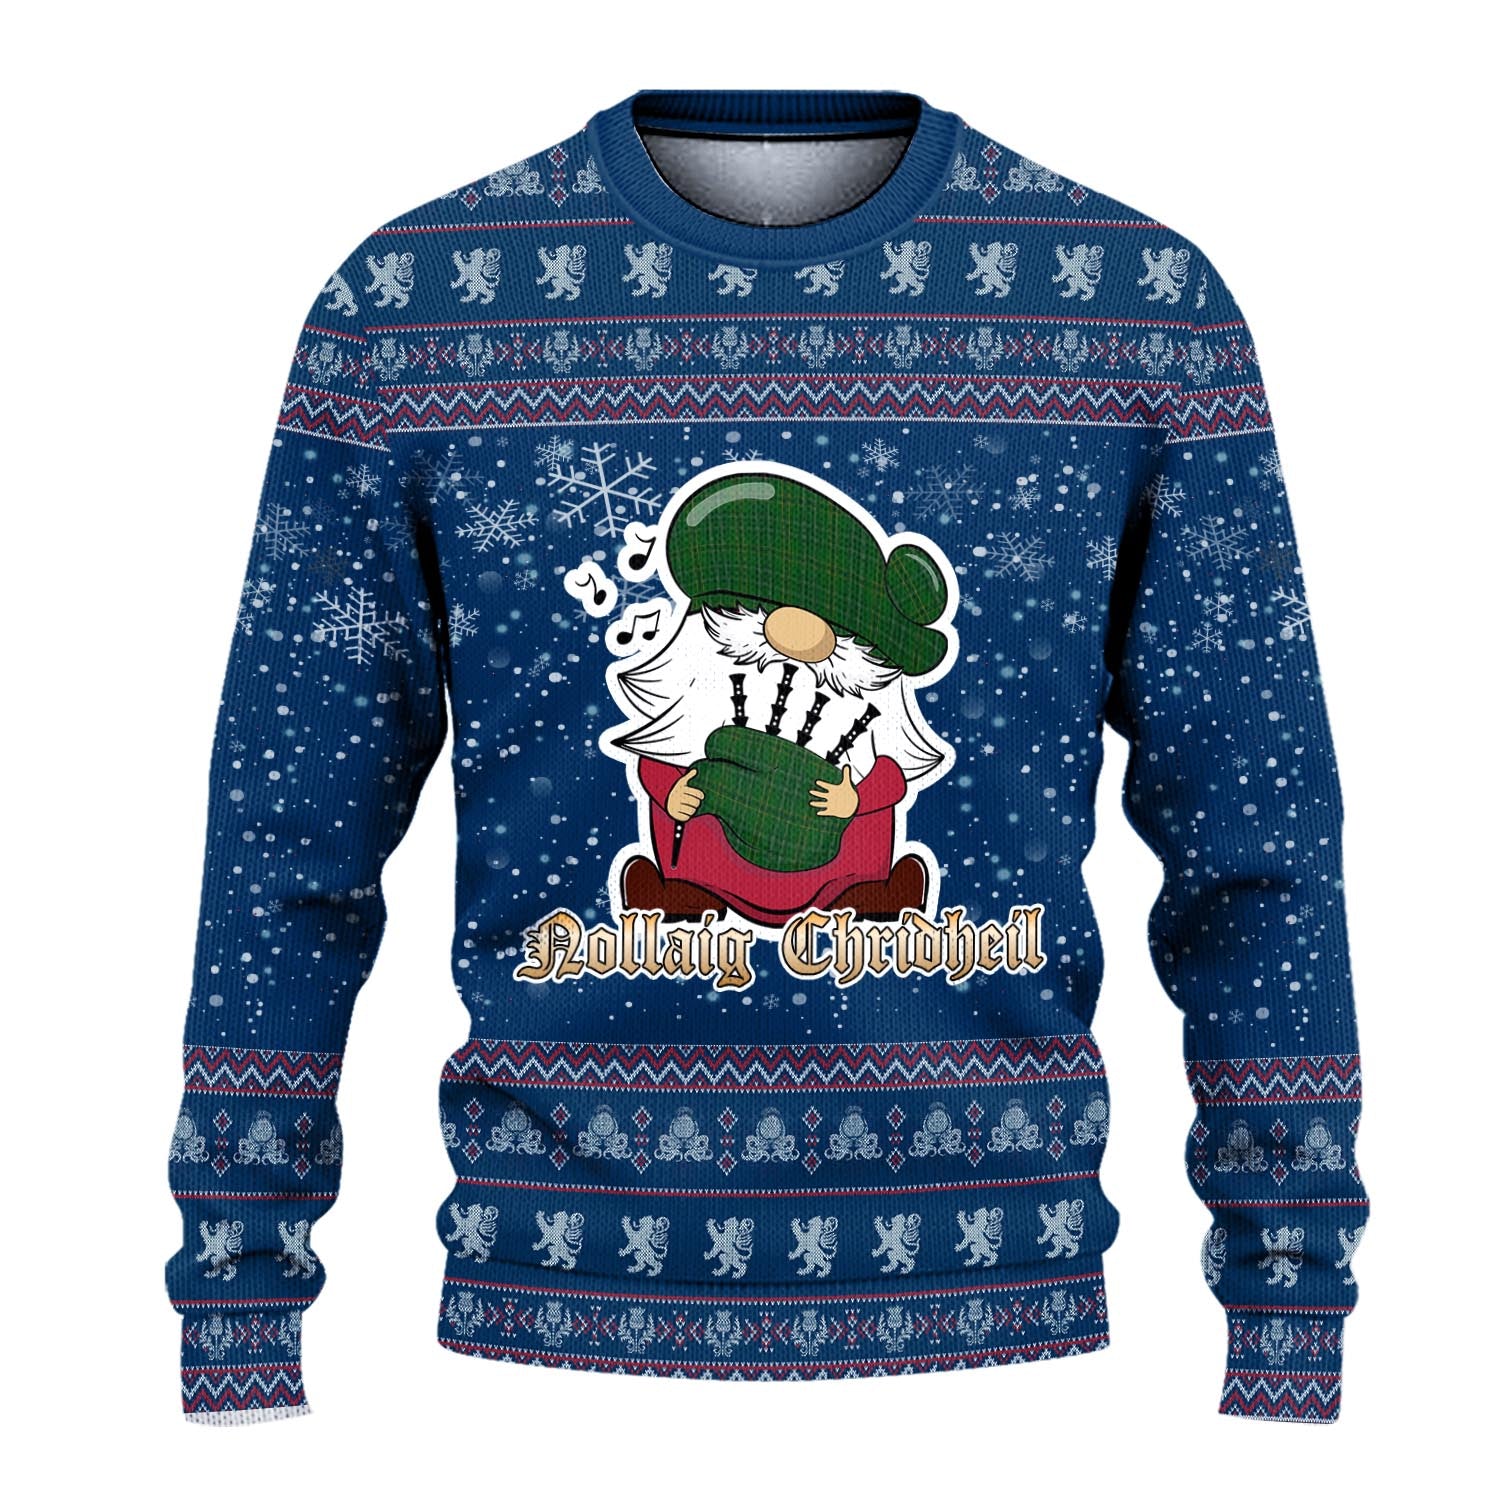 Wexford County Ireland Clan Christmas Family Knitted Sweater with Funny Gnome Playing Bagpipes - Tartanvibesclothing